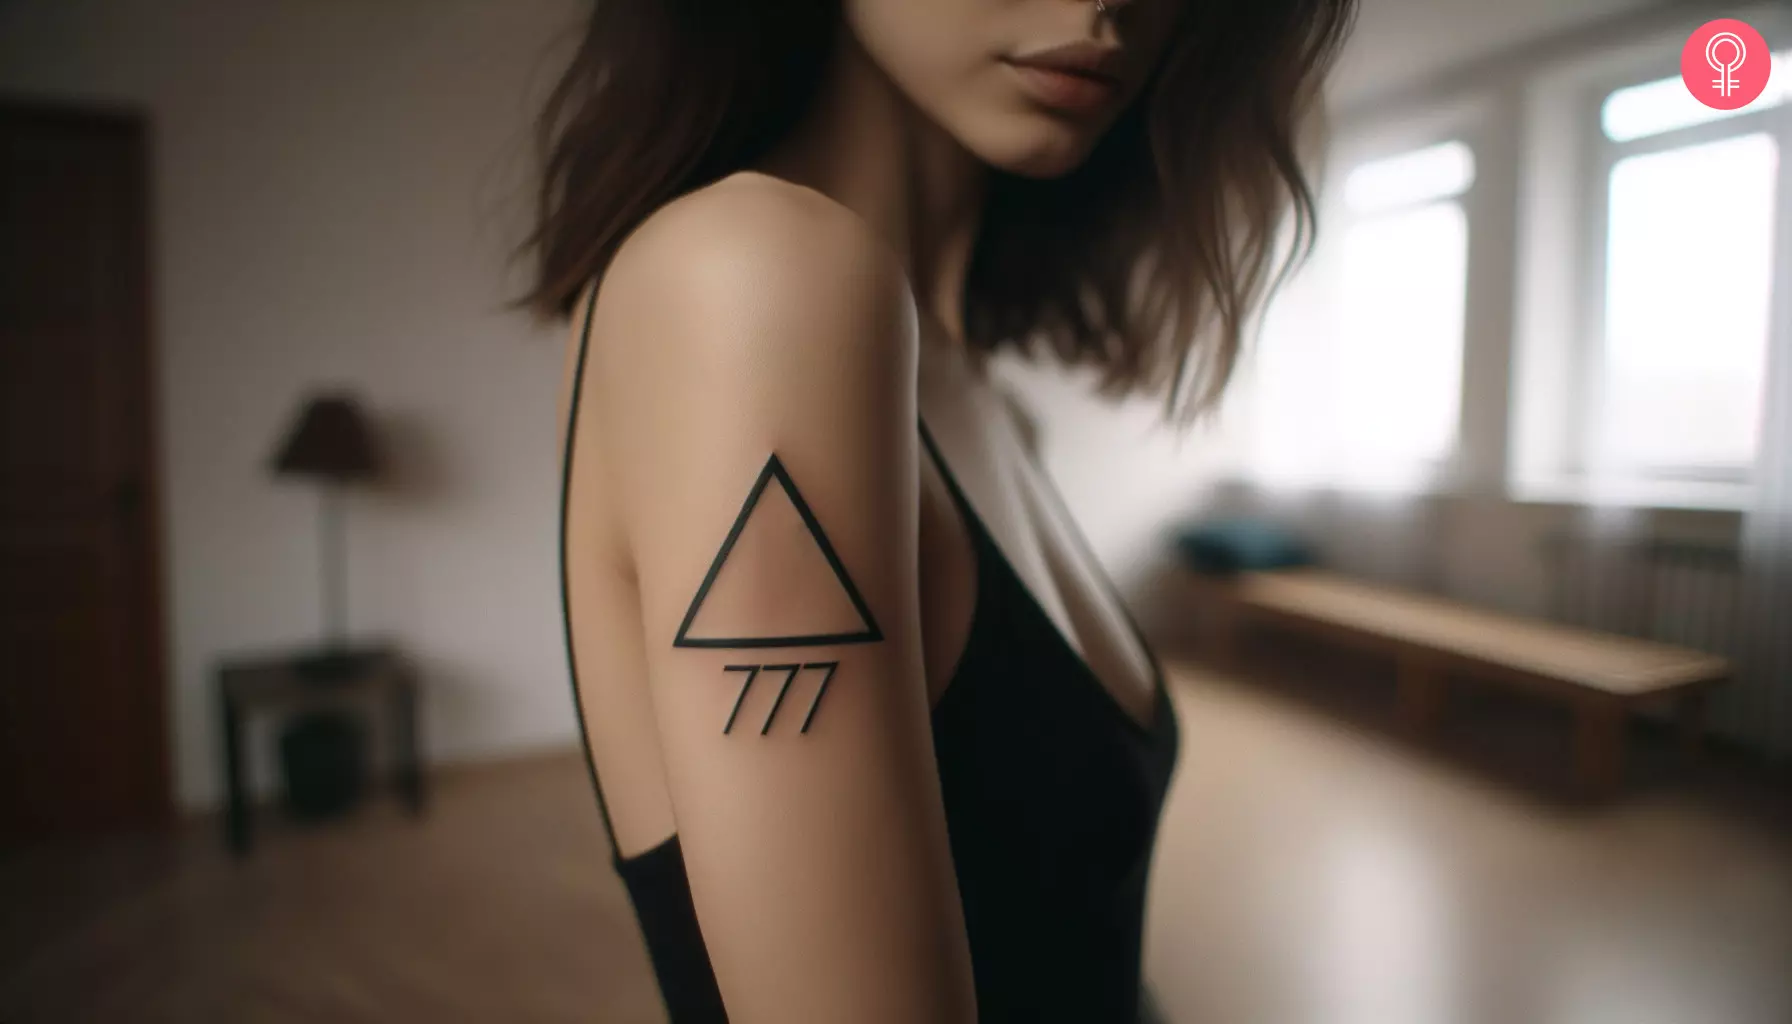 A woman with a 777 triangle tattoo on her upper arm